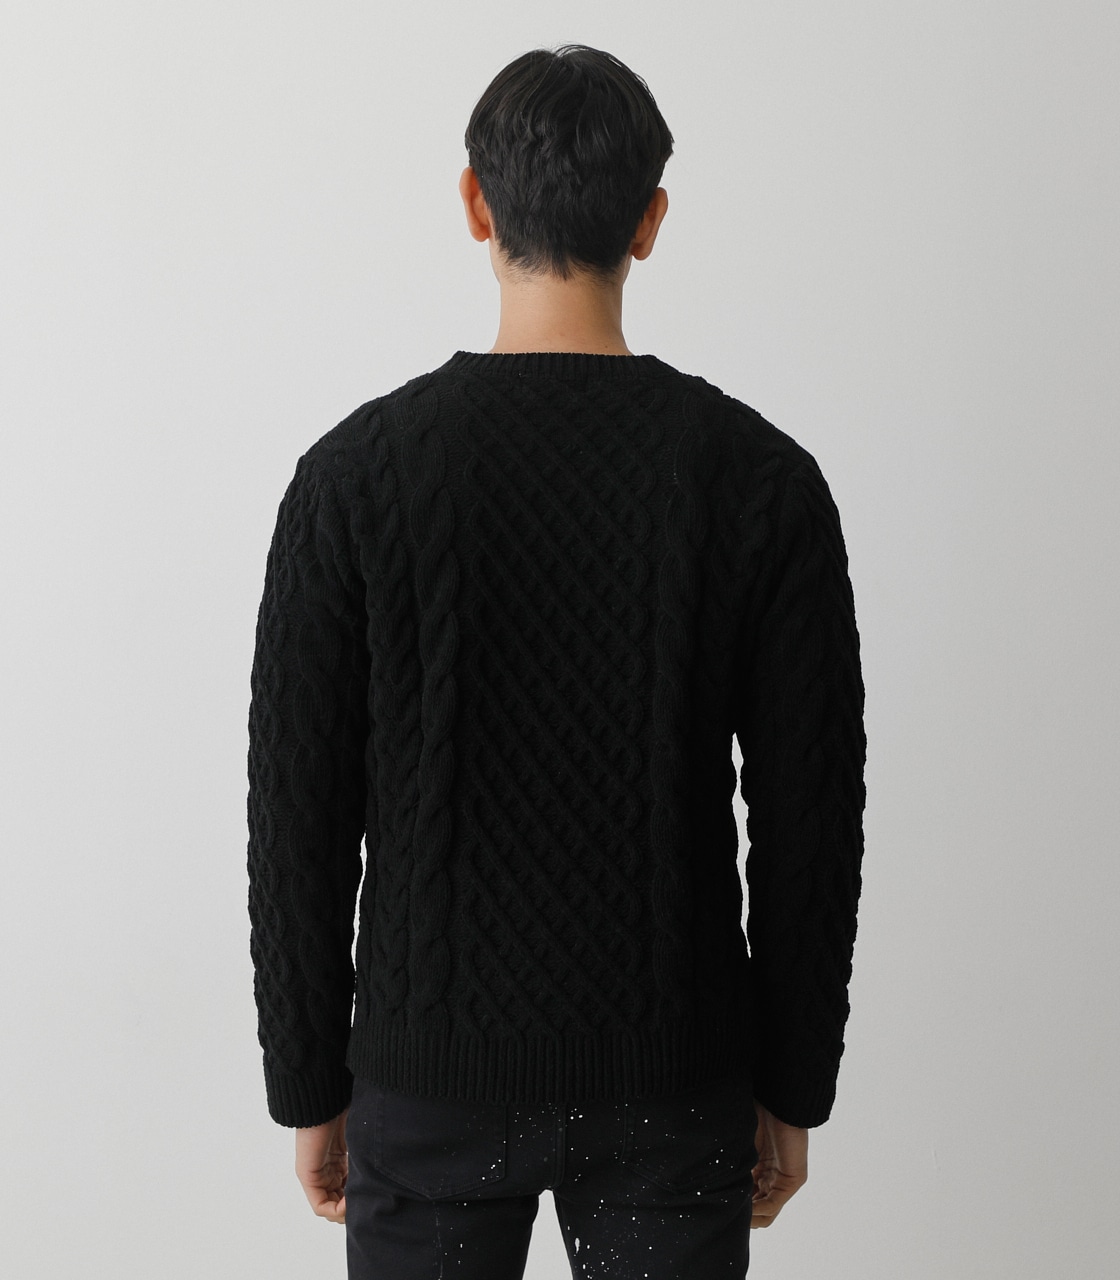 CHENILLE CABLE PULLOVER/シェニールケーブルプルオーバー 詳細画像 BLK 7